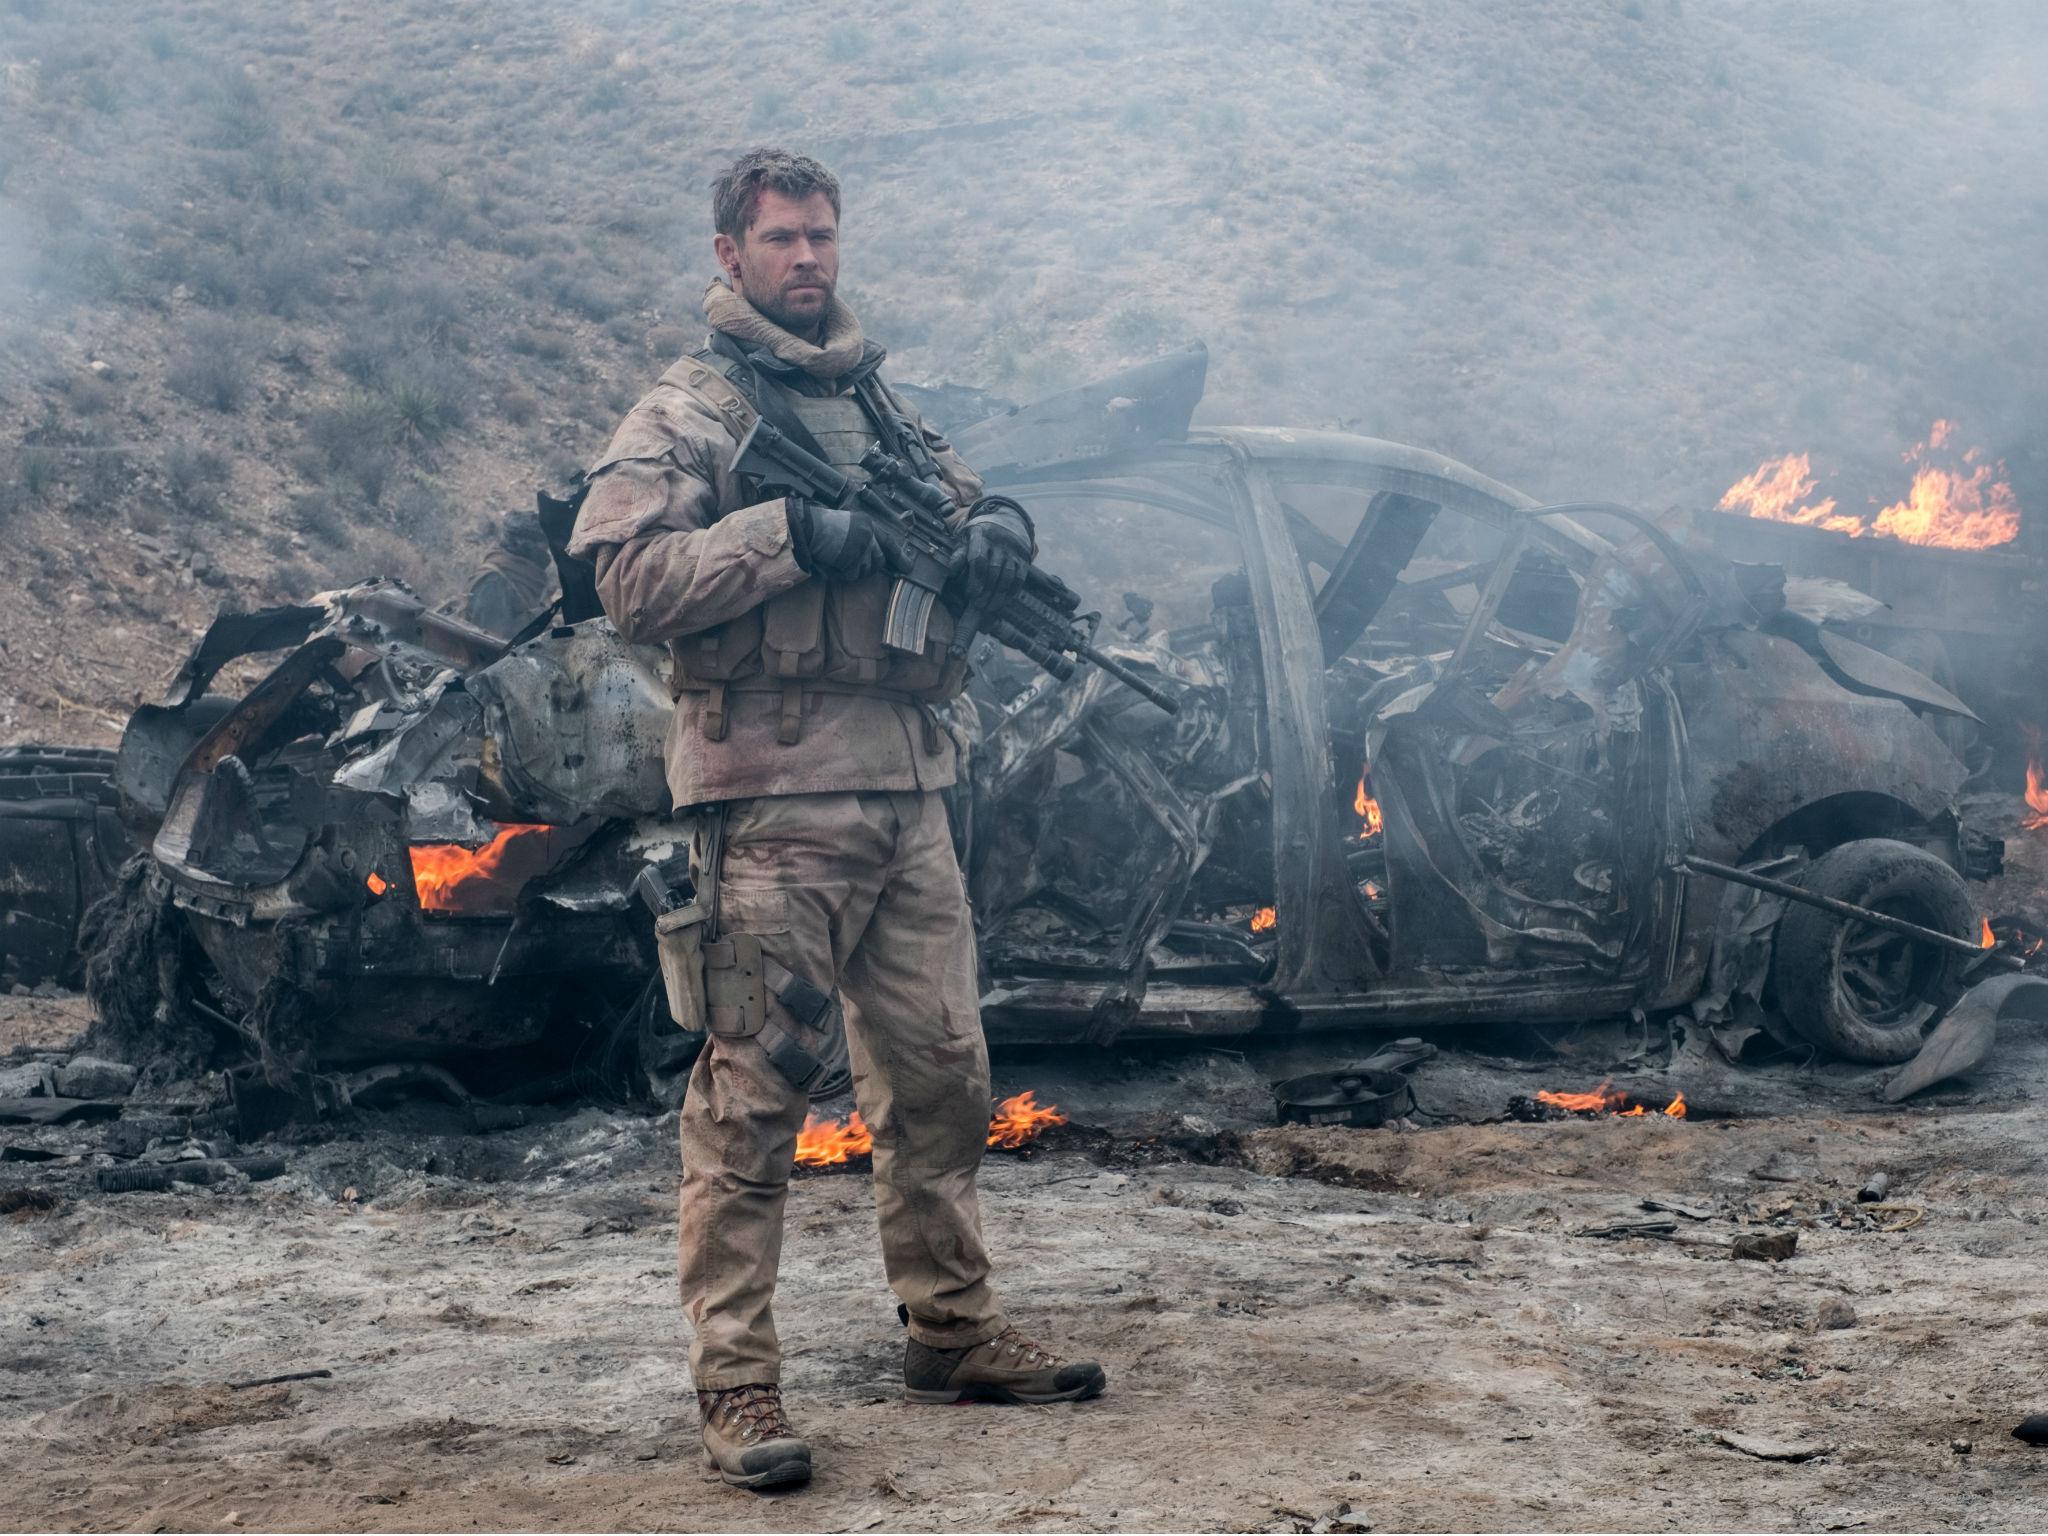 Hemsworth (above) as a soldier in ‘12 Strong’: ‘I don’t know how they do it,’ he says